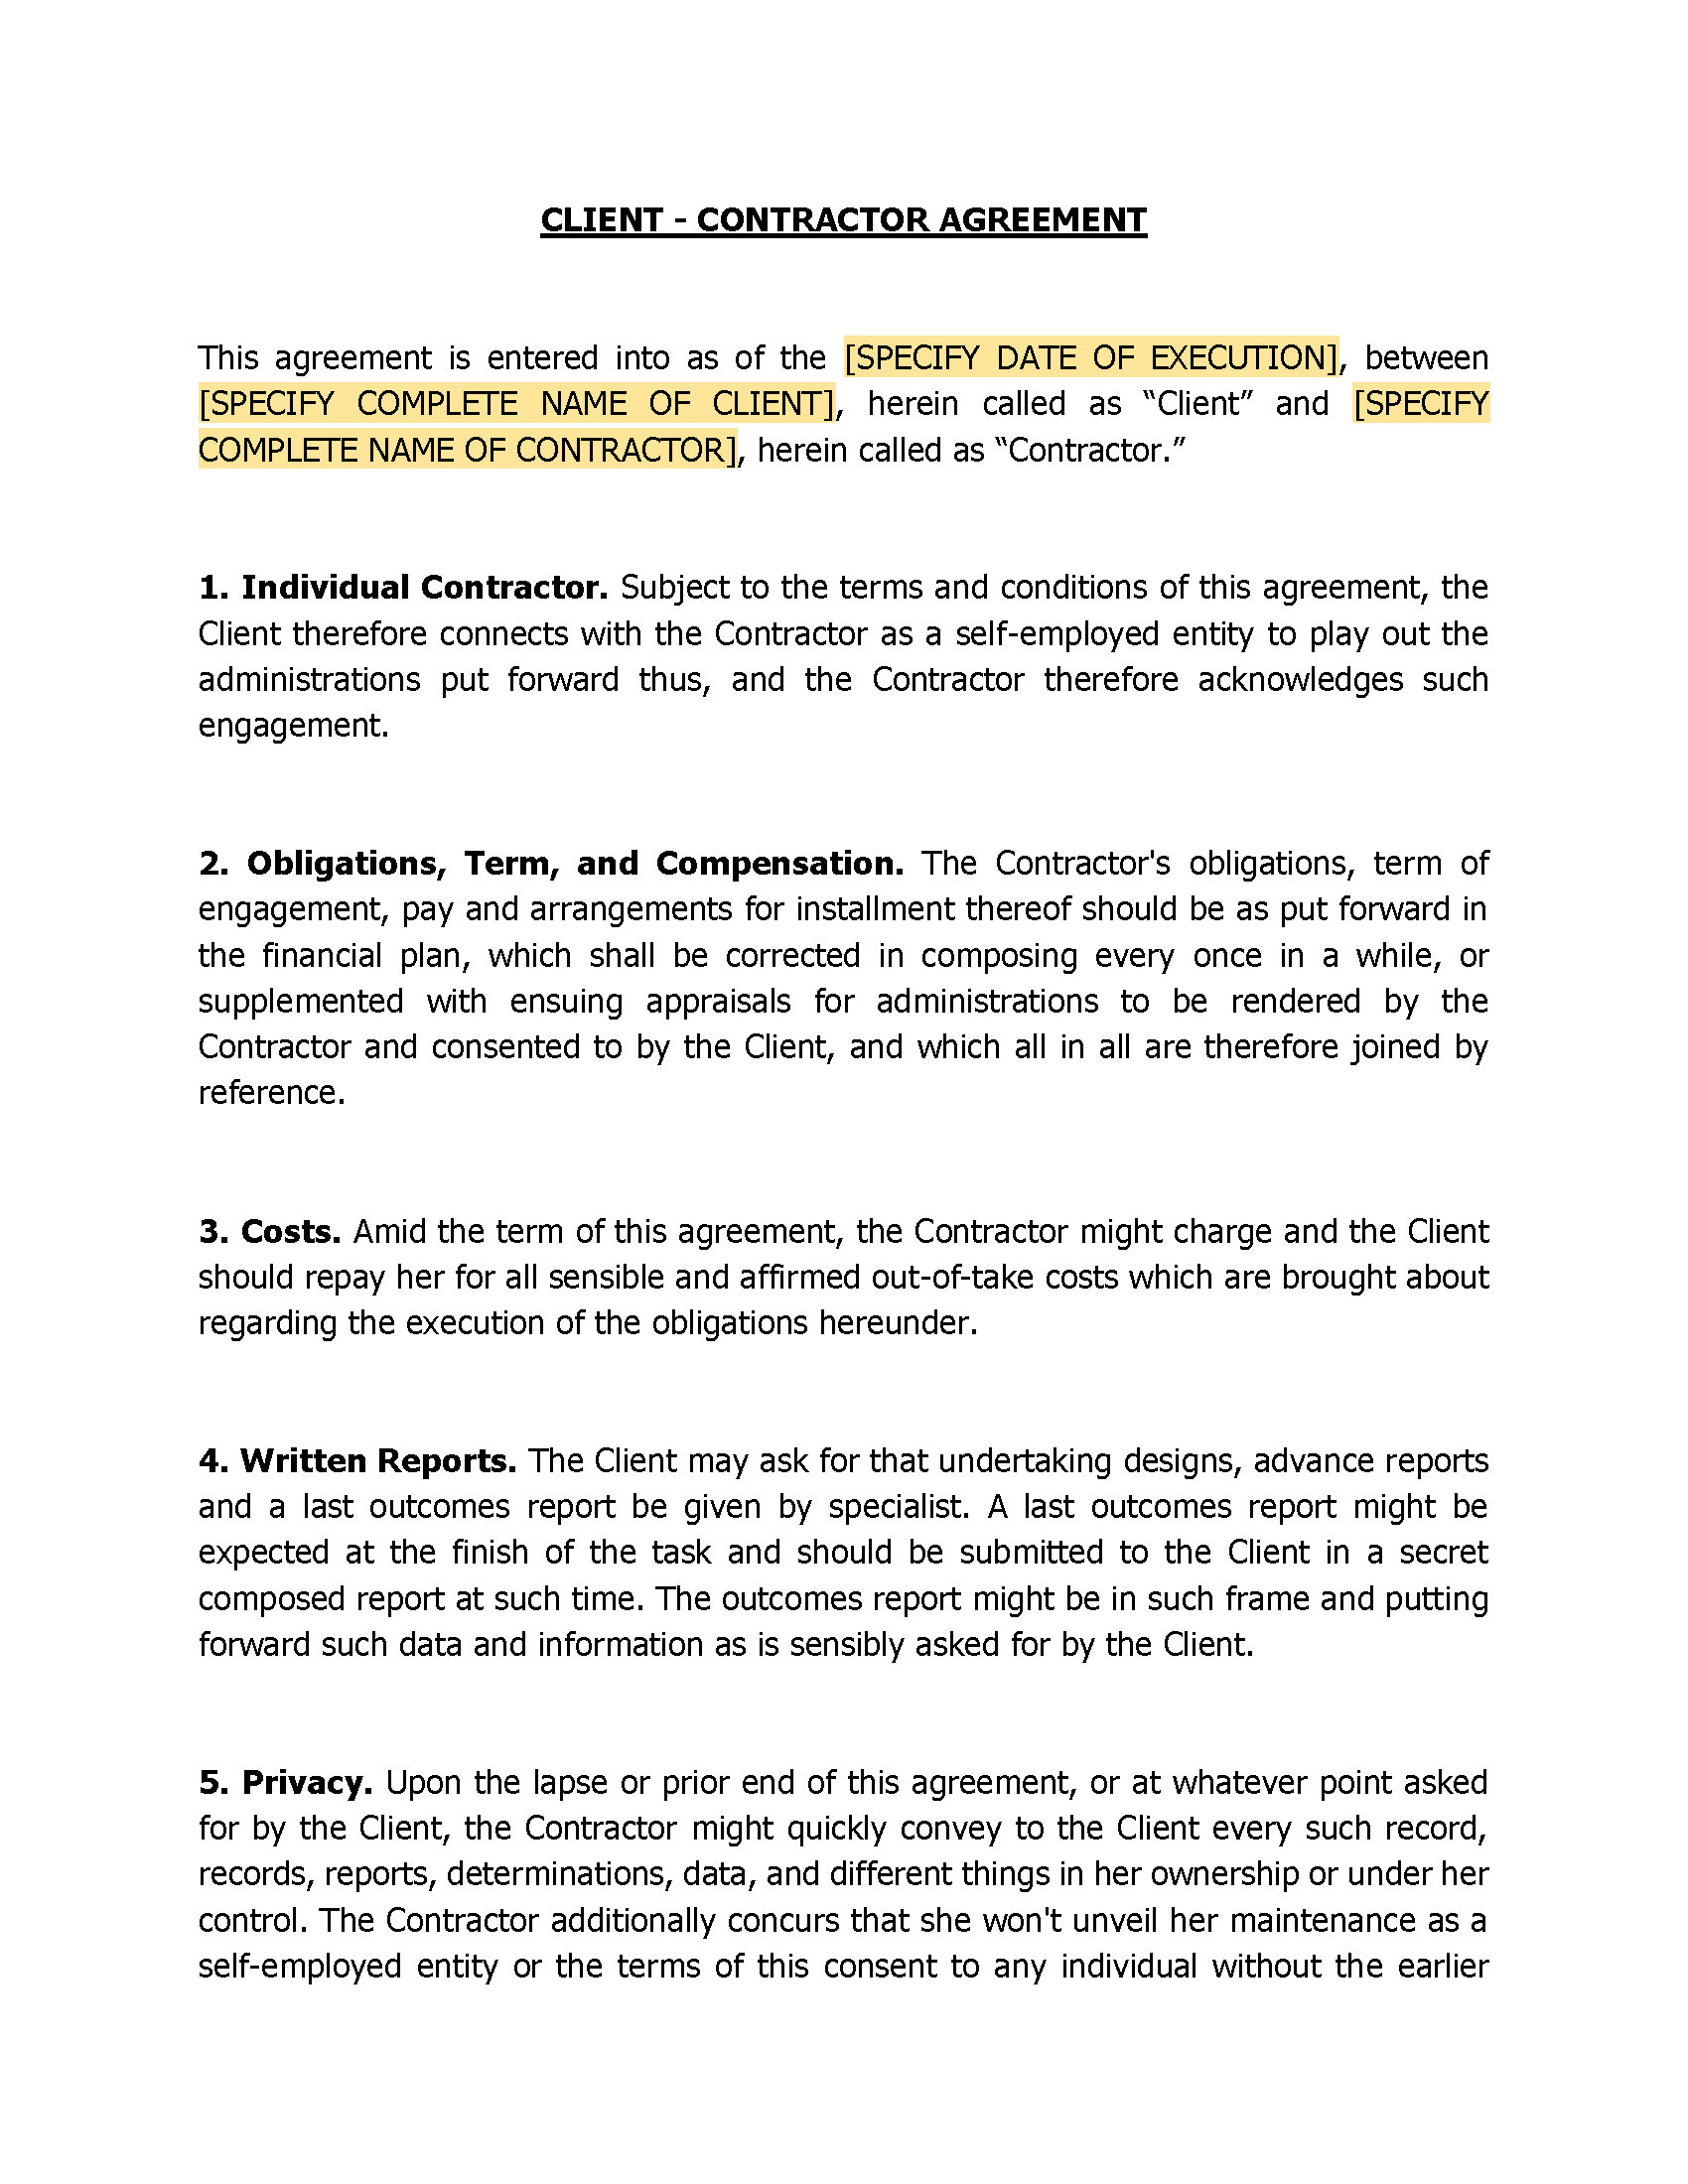 Client - Contractor Agreement